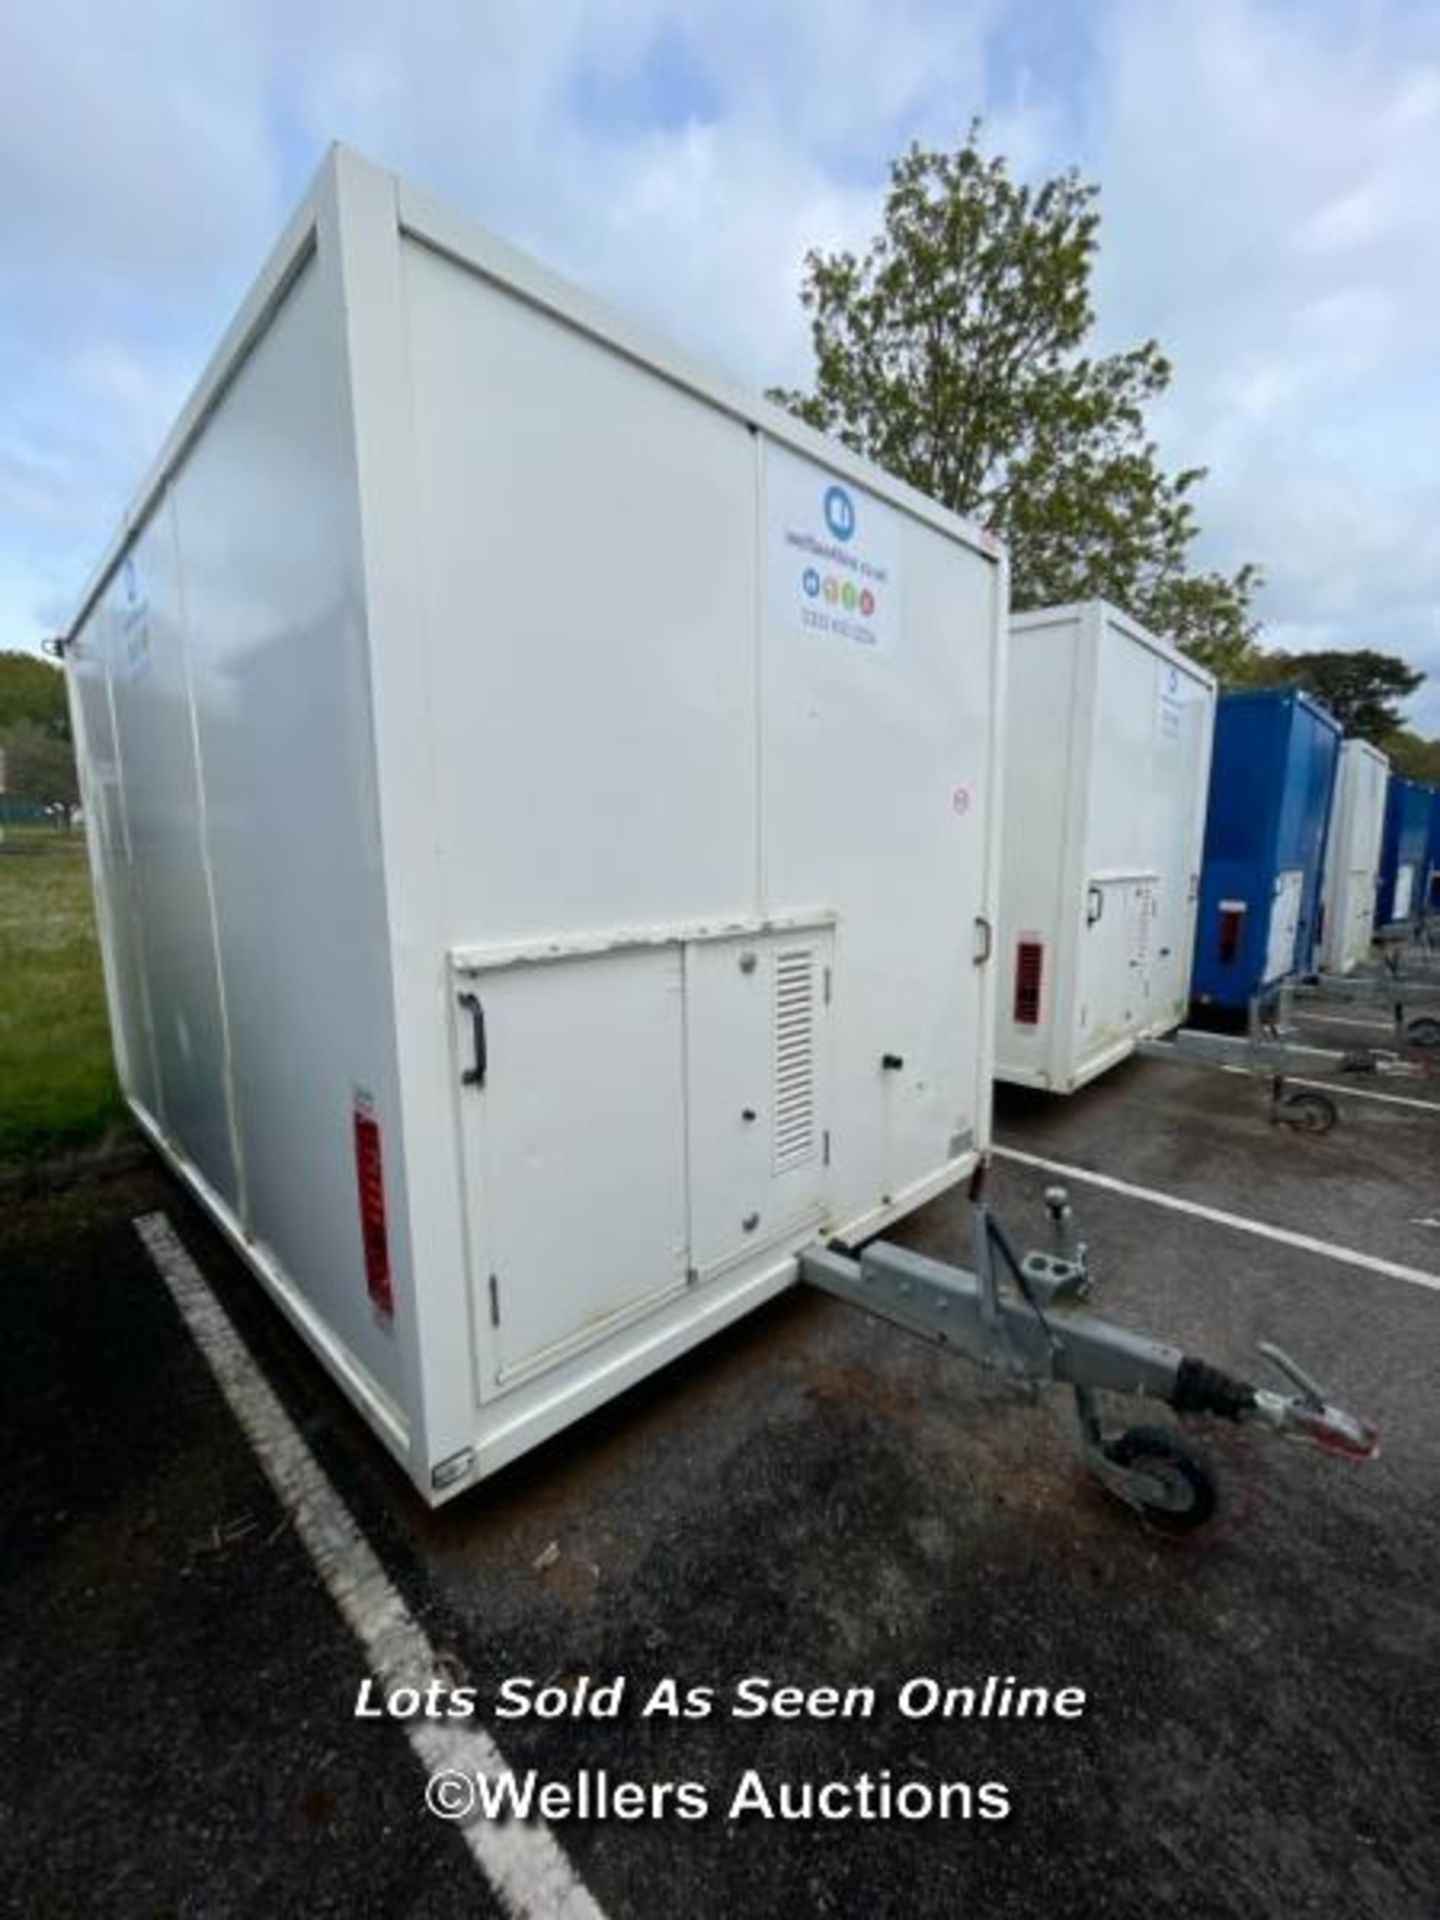 6 PERSON 12 X 7.5FT AJC EASY CABIN TOWABLE WELFARE UNIT, INCLUDES WASH BASIN, KETTLE, MICROWAVE, - Image 2 of 15